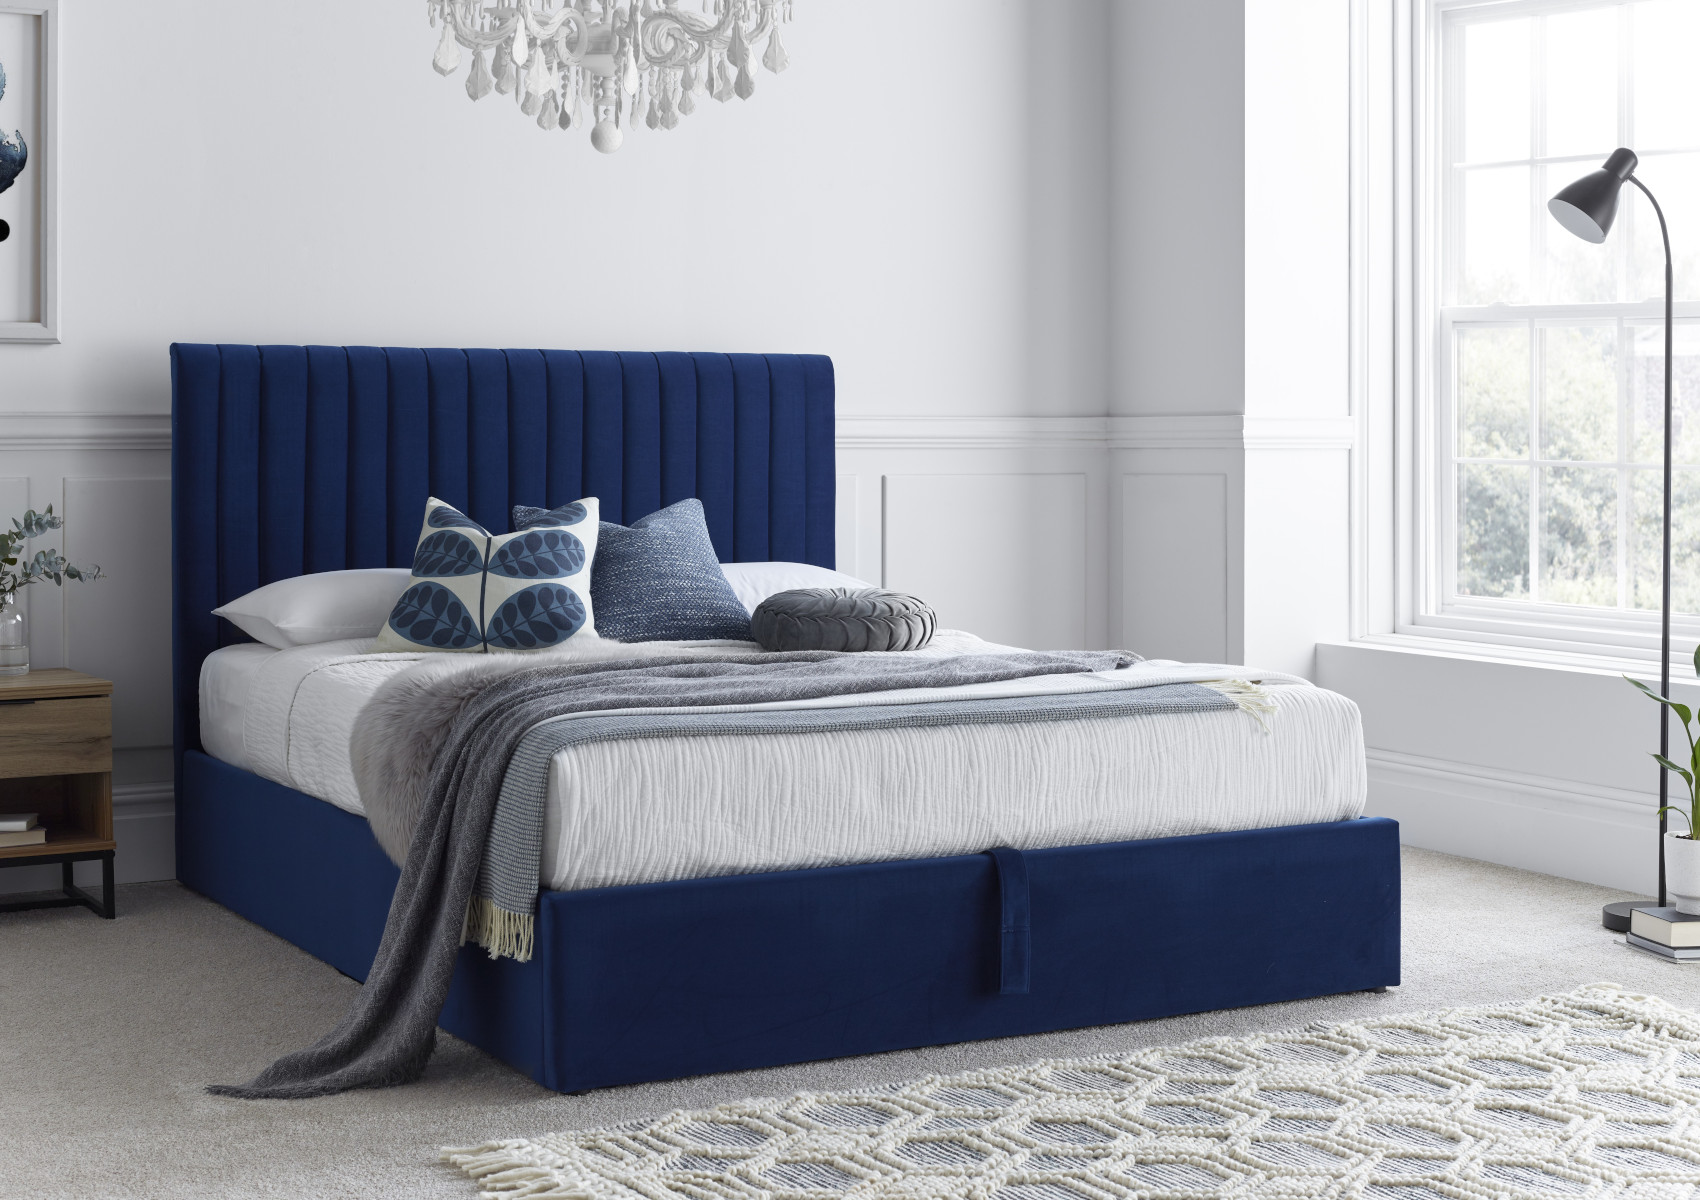 View Annabel Blue Upholstered Double Ottoman Bed Time4Sleep information